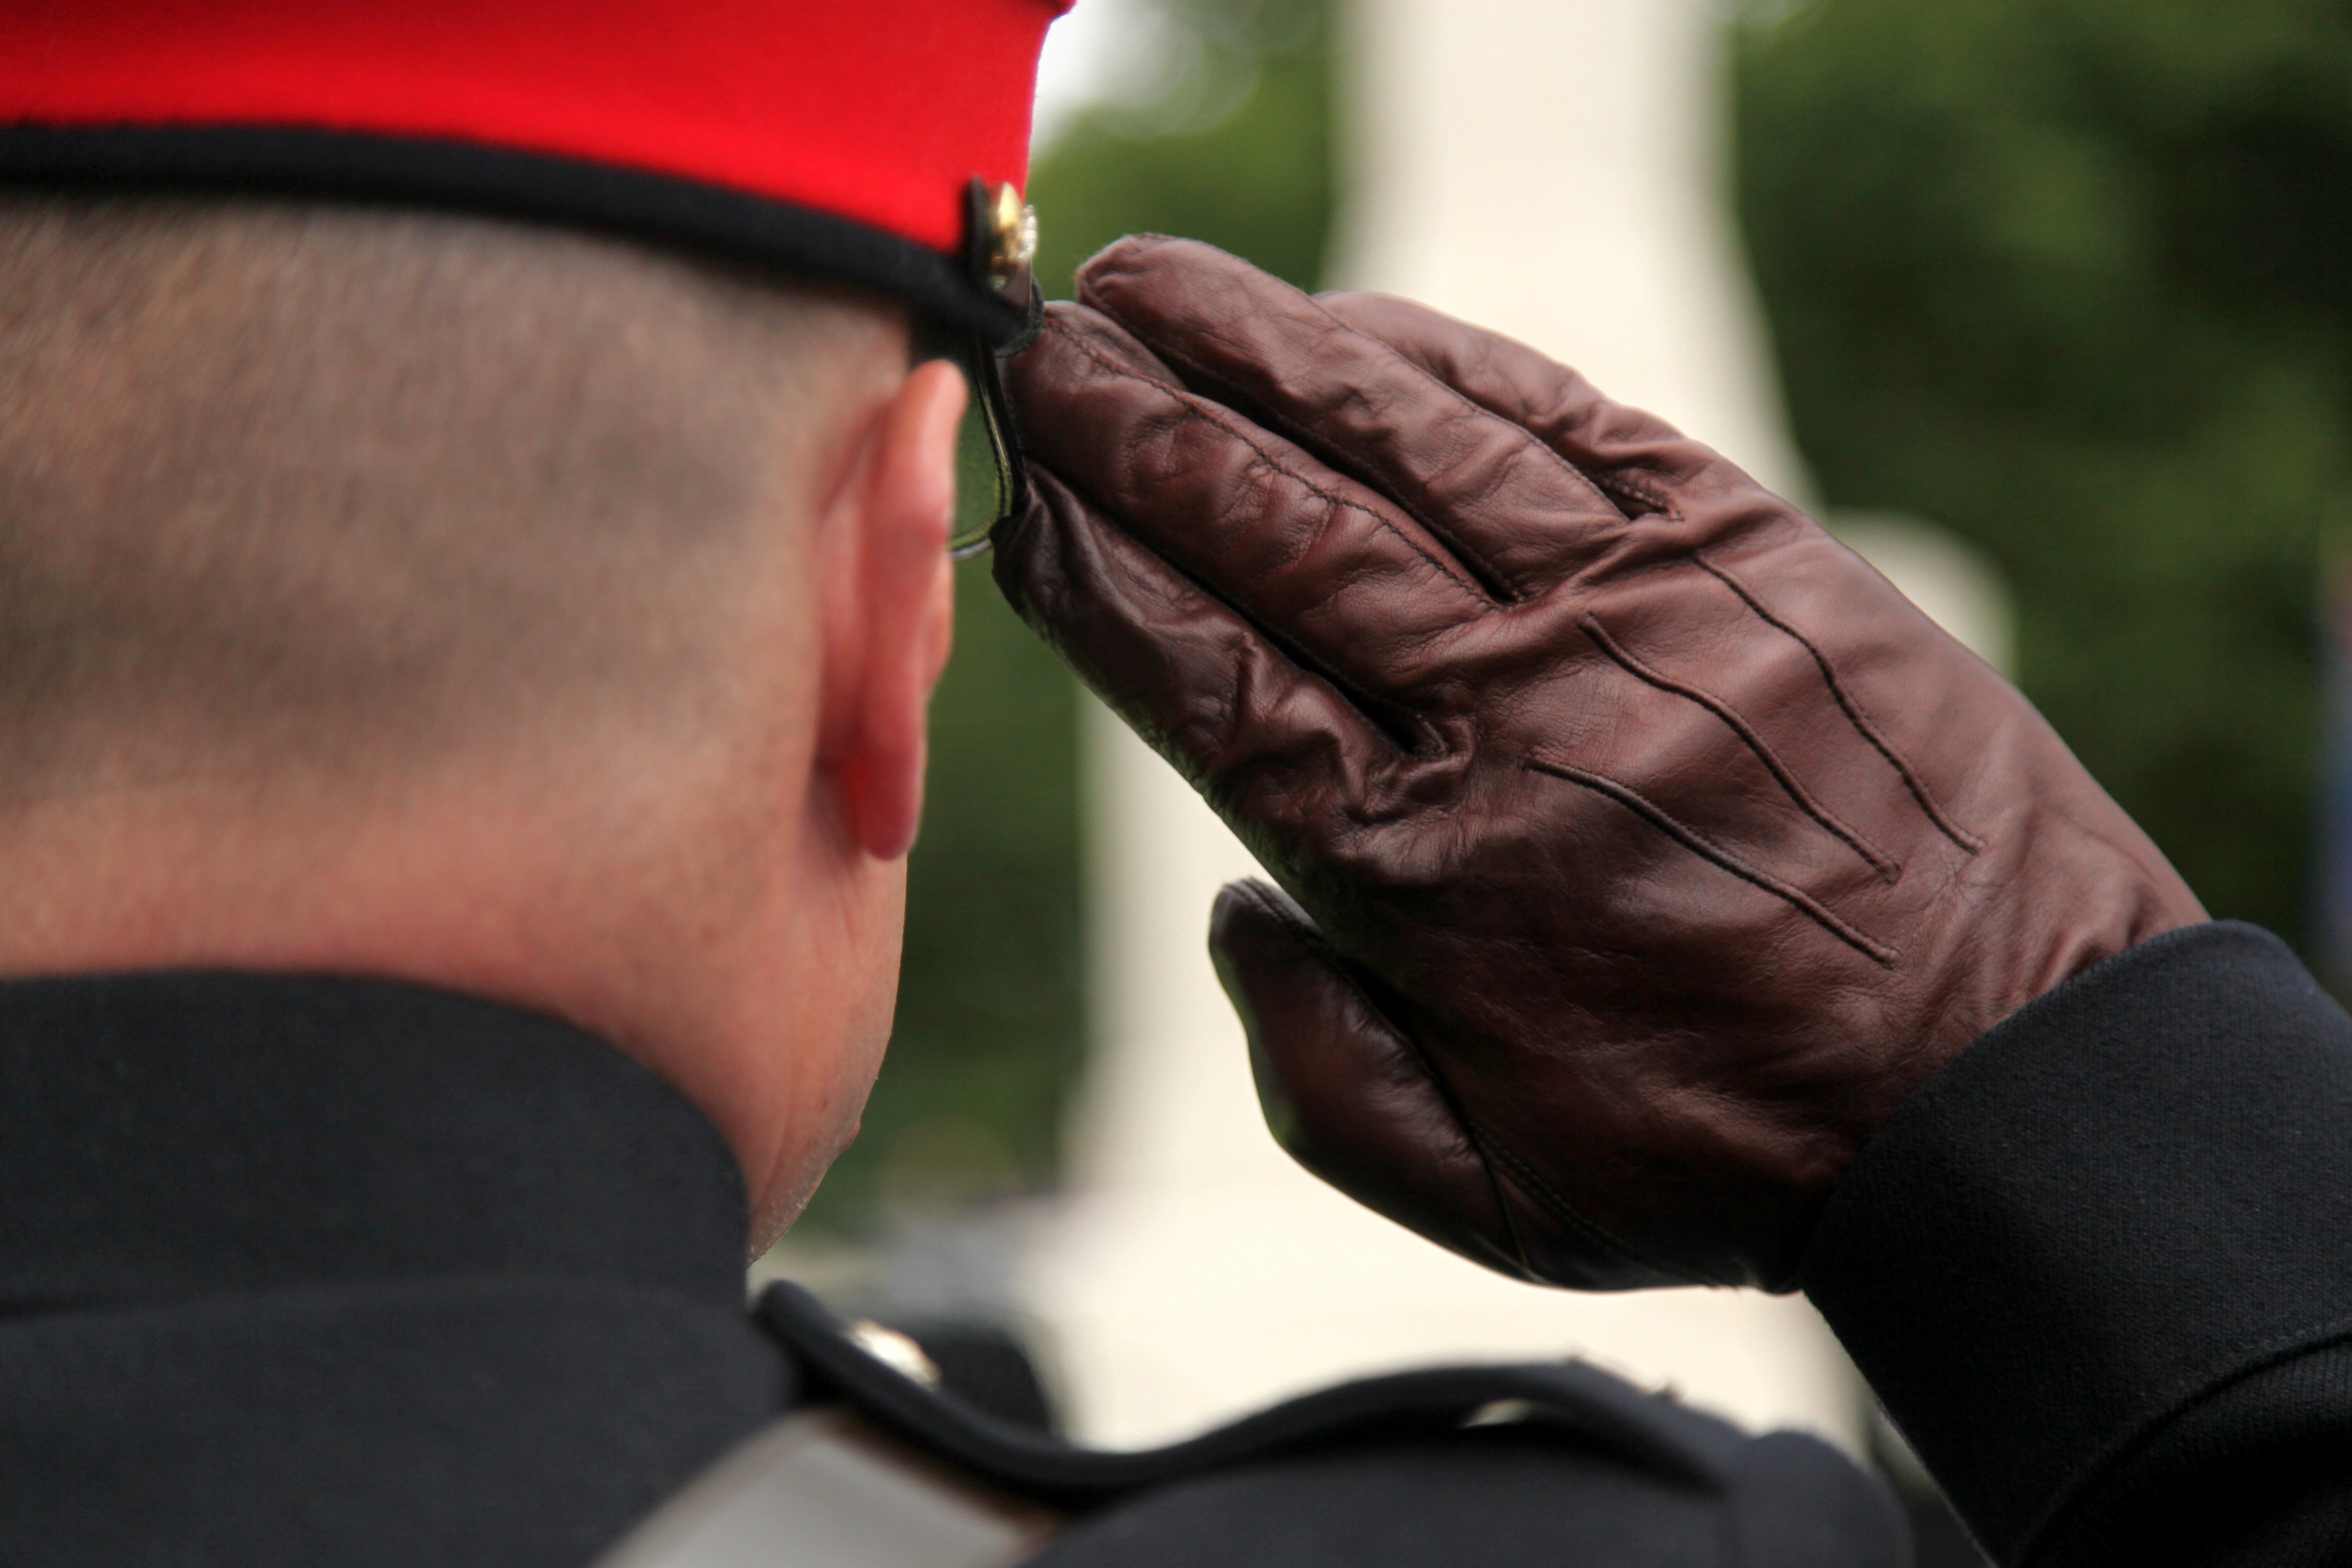 Armed Forces Day marked by post pandemic support for West Midlands homeless veterans